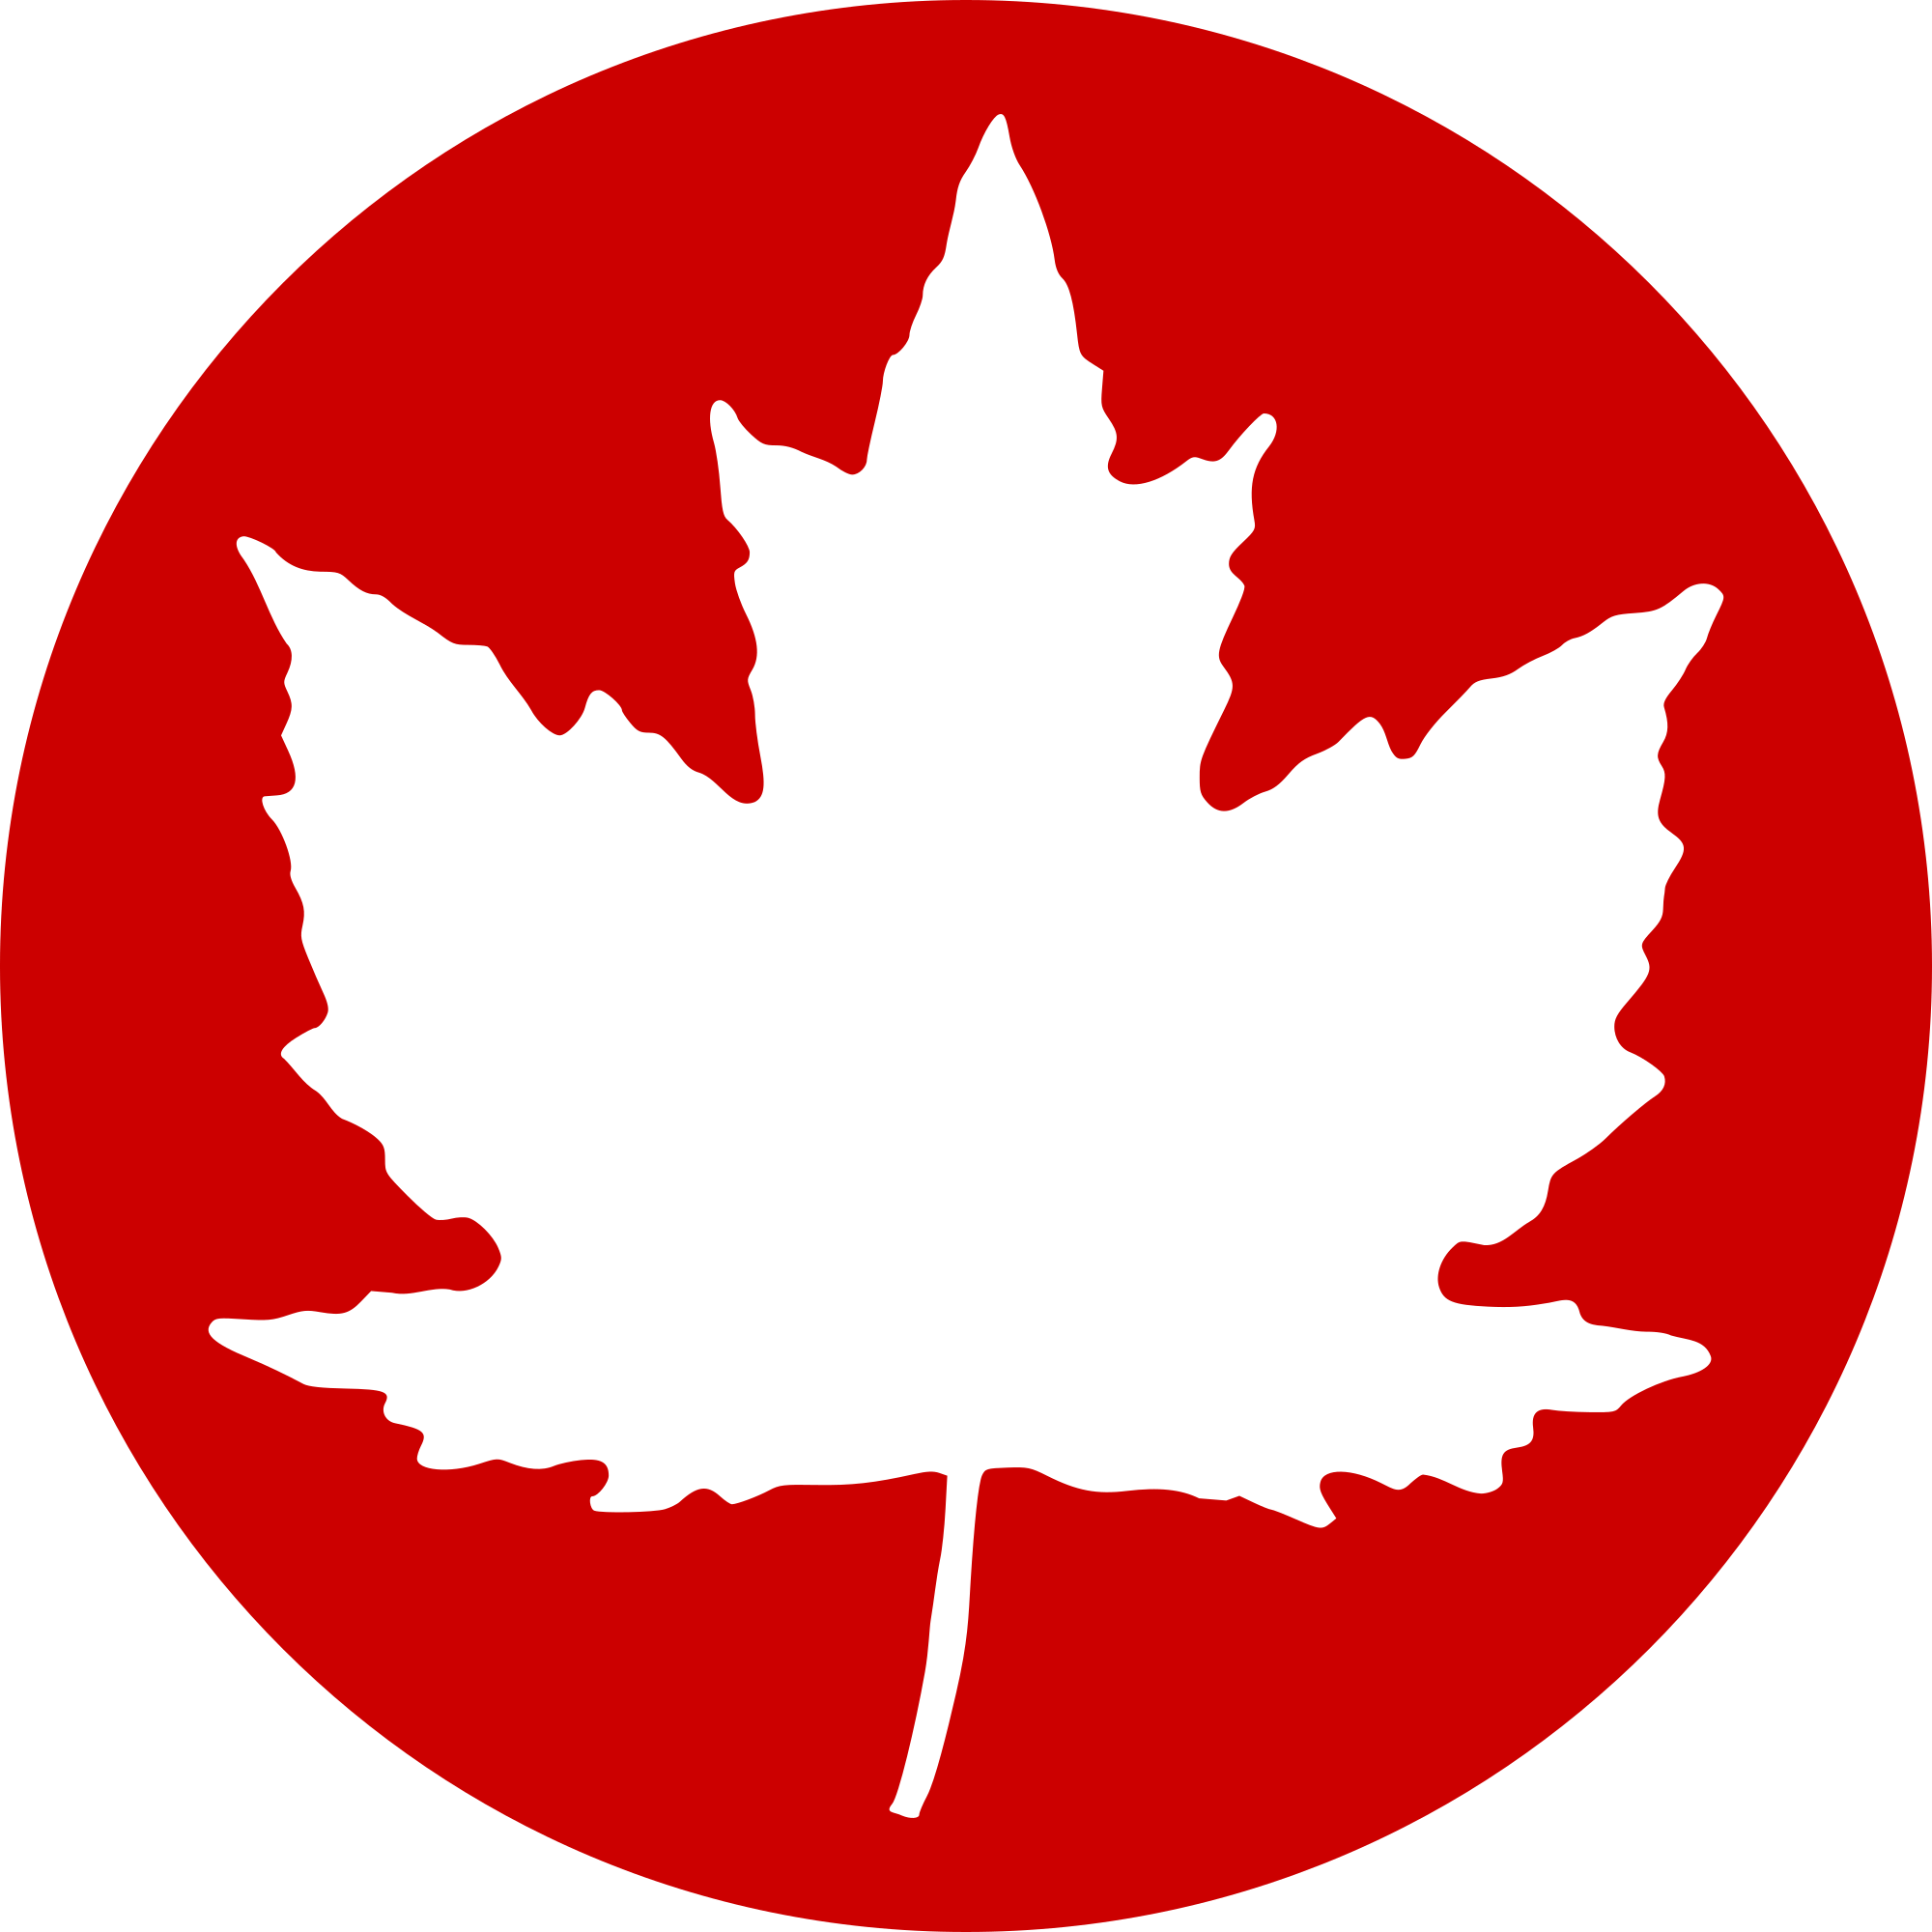 Red Leaf in Circle Logo - File:Circle-icons-Canada.svg - Wikimedia Commons